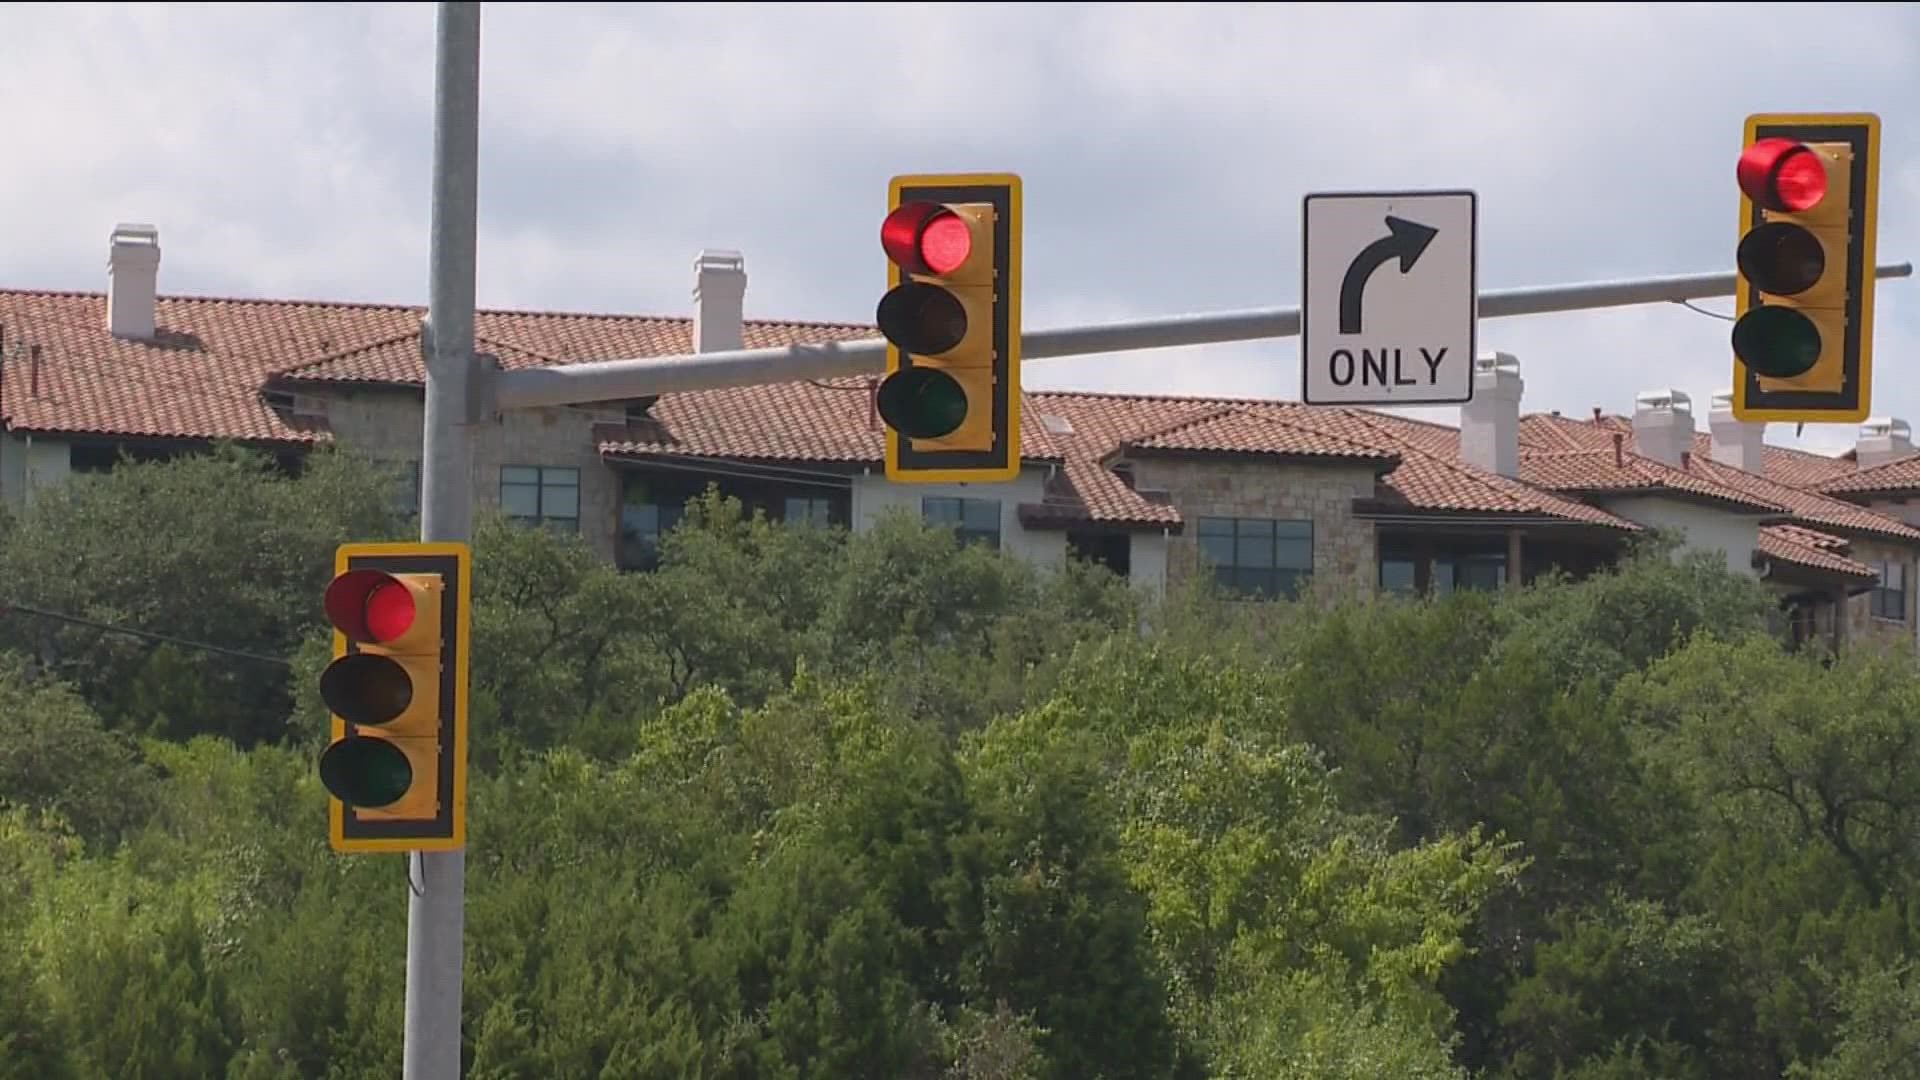 The Austin Transportation Department said improvements have been made at 19 major intersections since 2016.